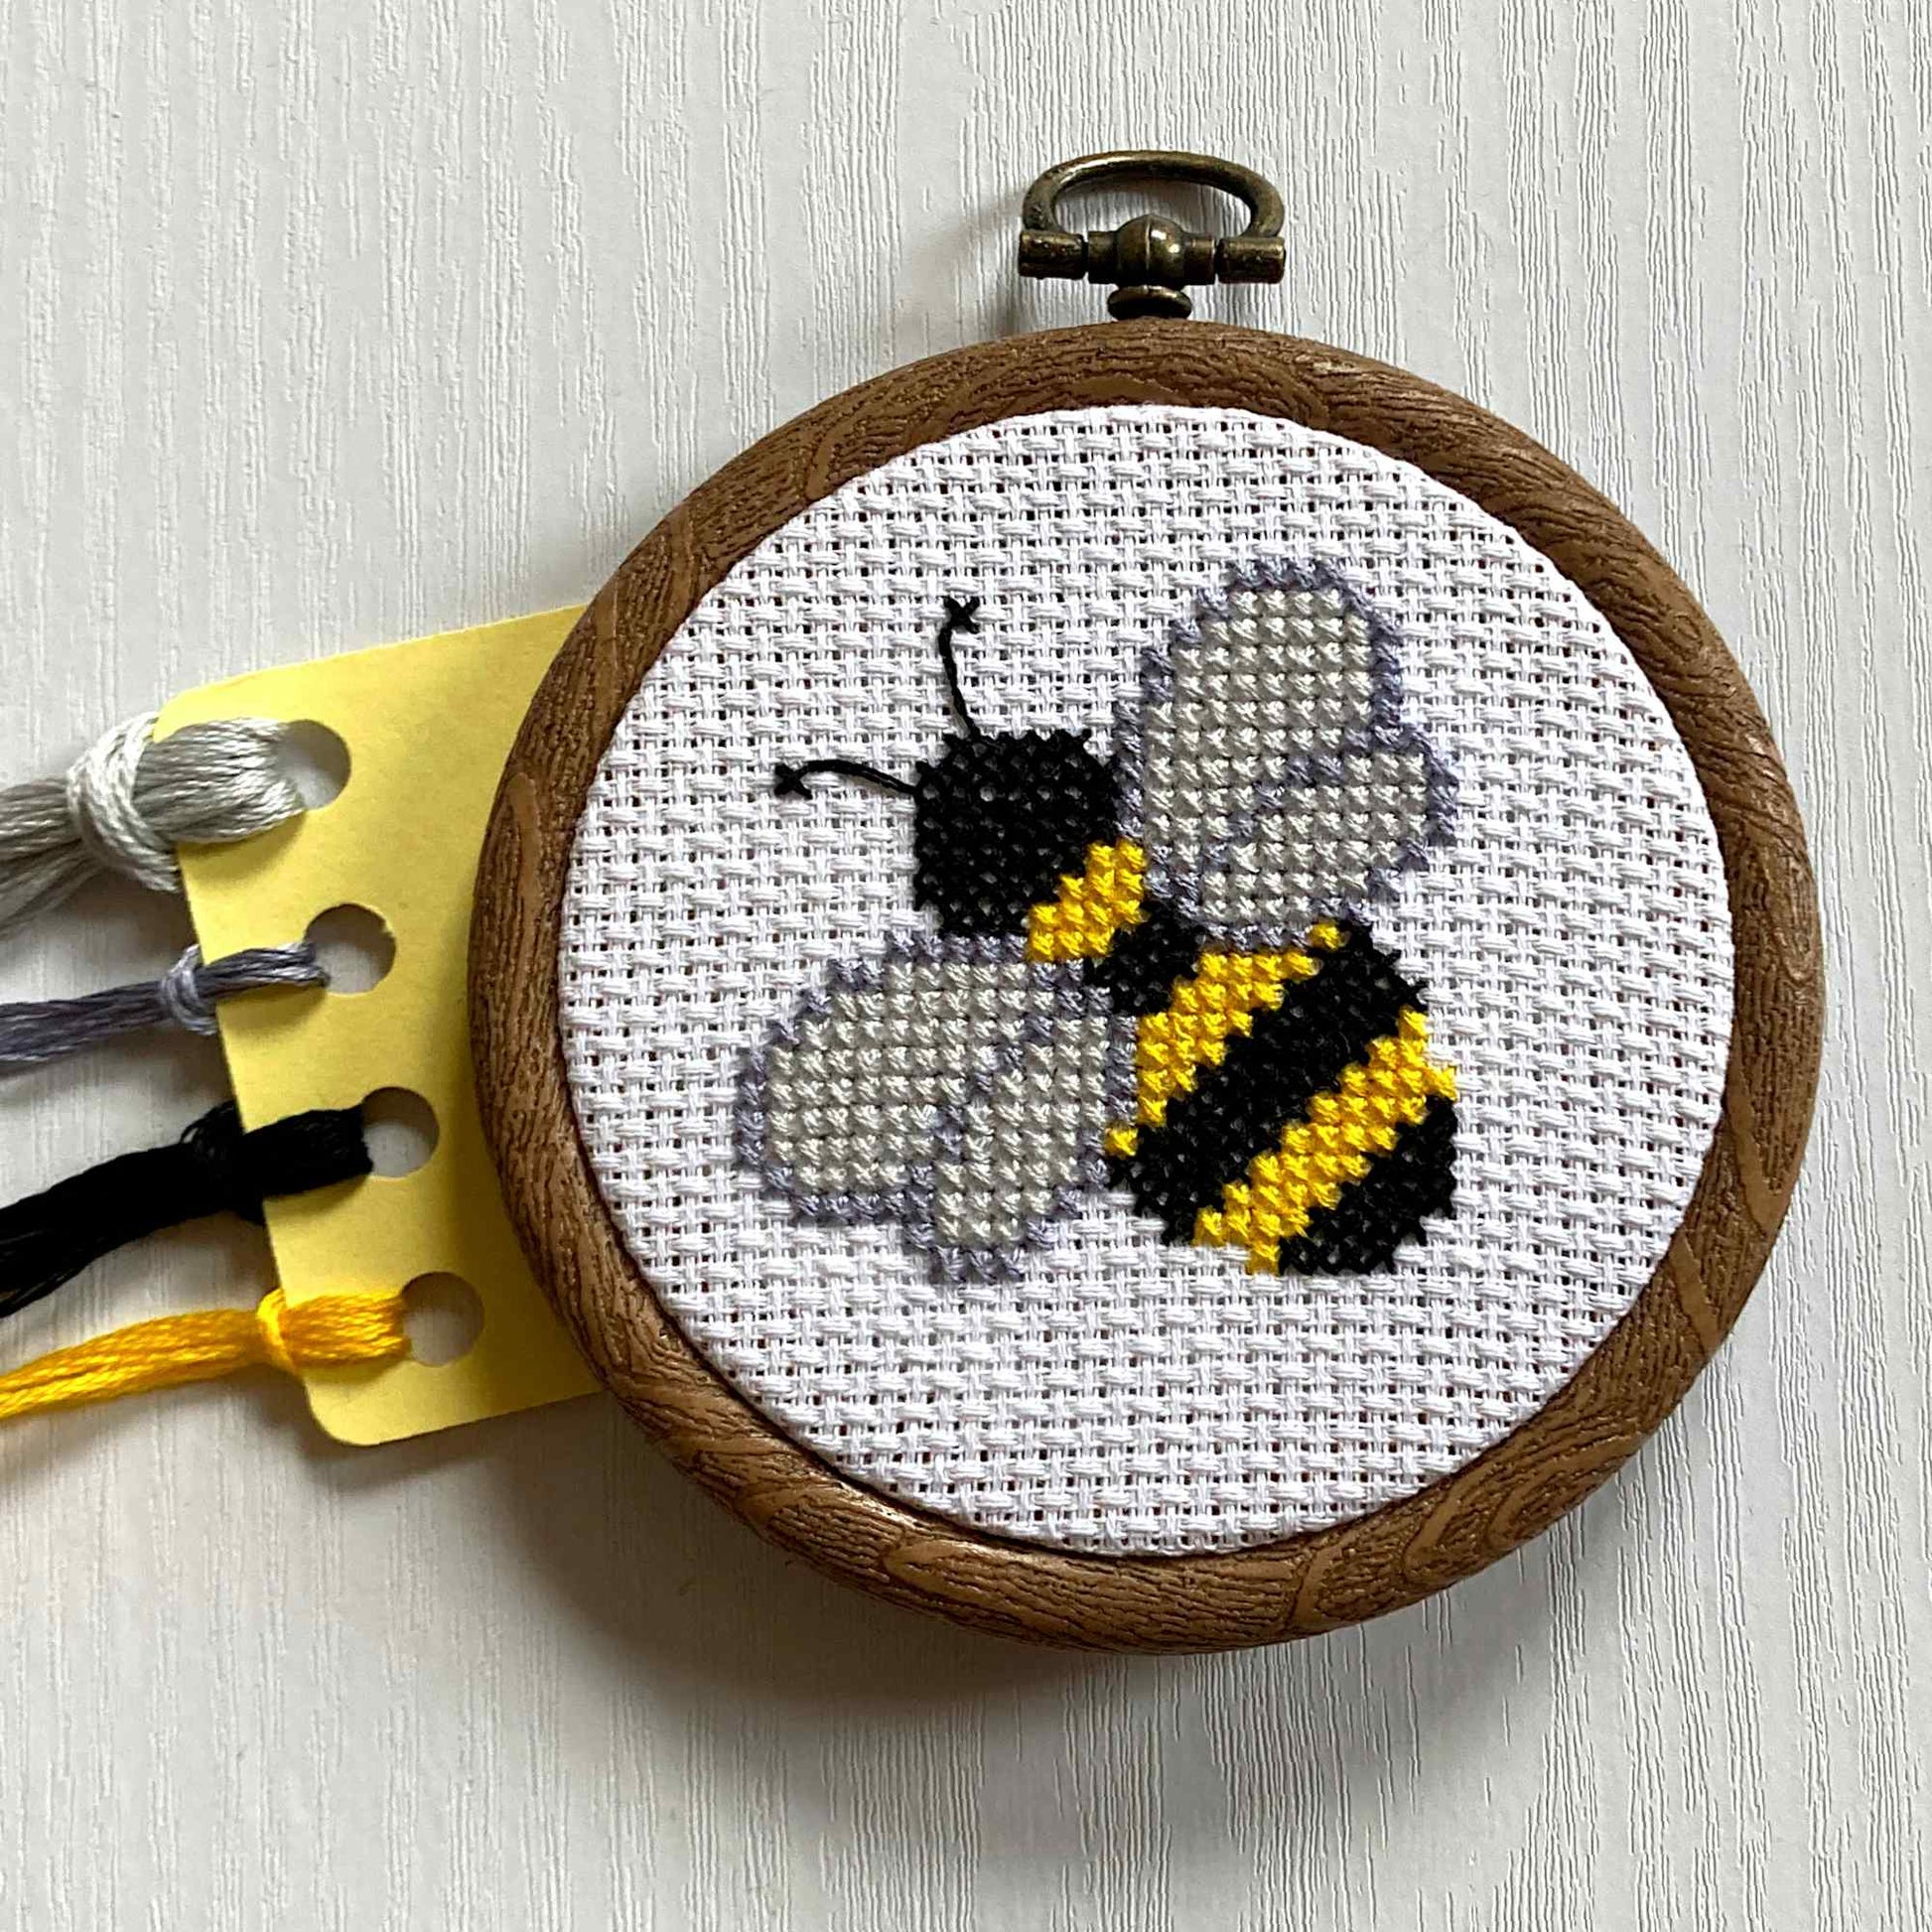 Bumble Bee Cross Stitch in flexi hoop with DMC threads